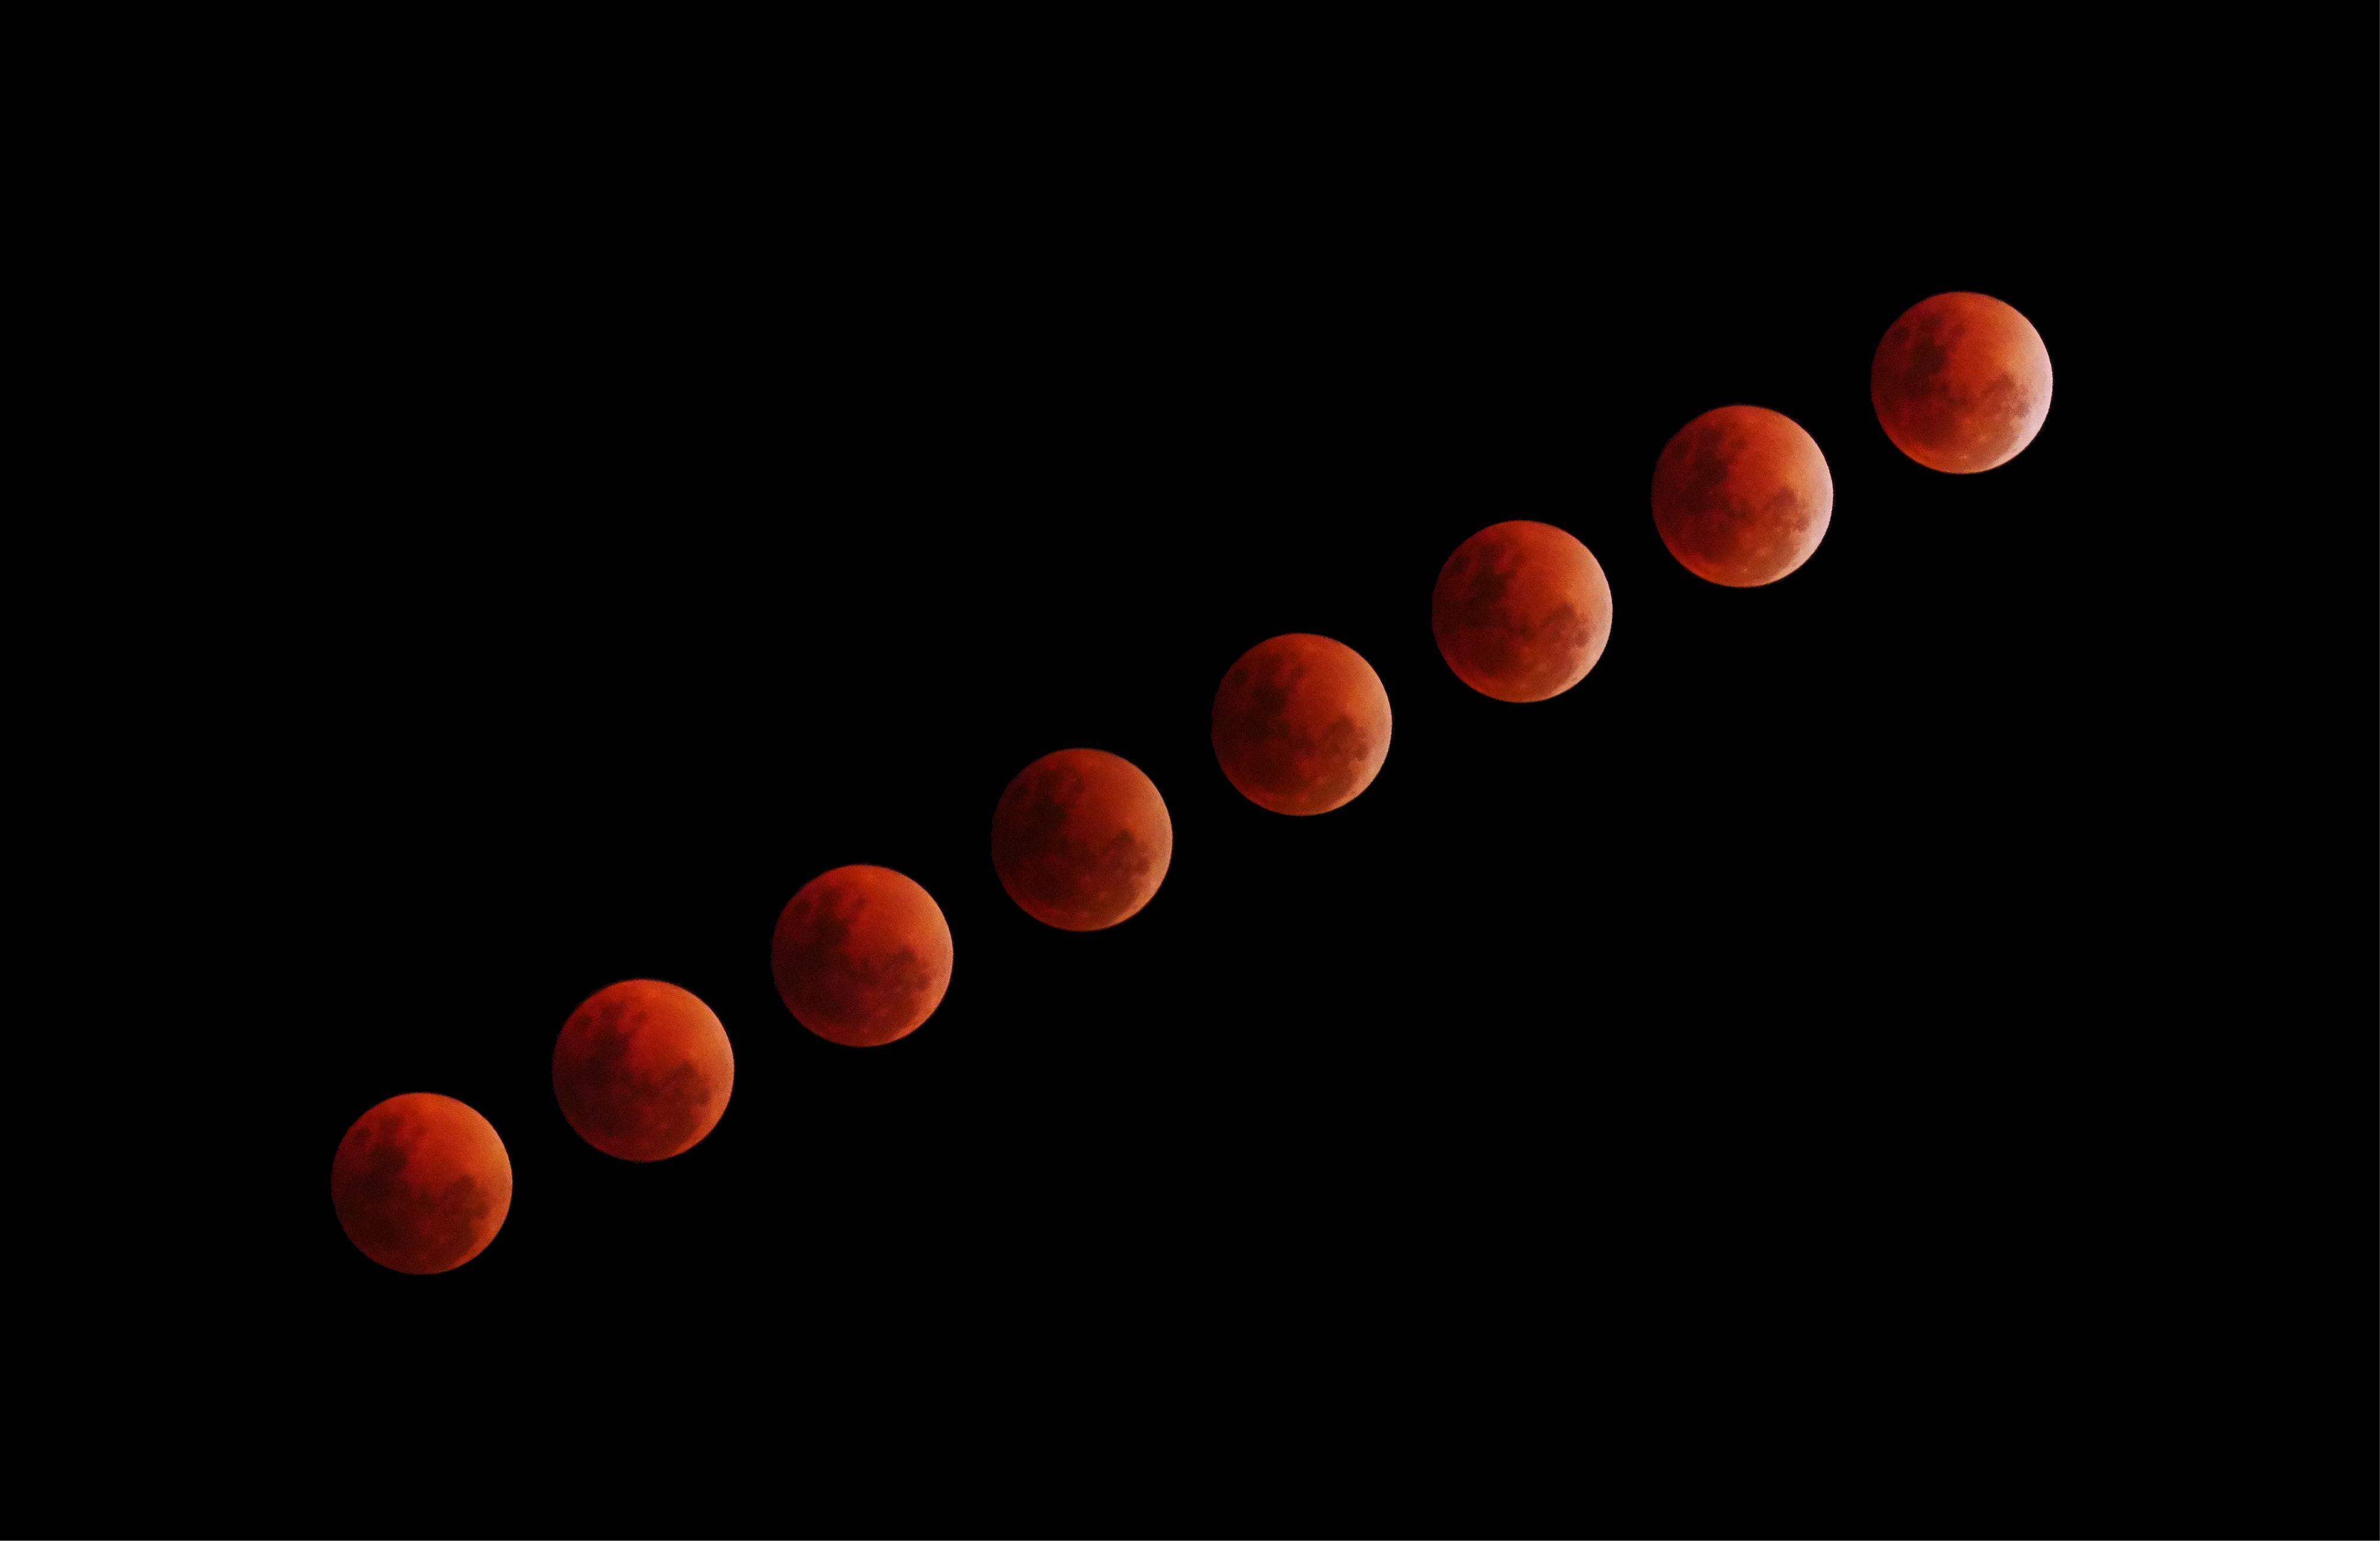 Try using a long lens when capturing a lunar eclipse